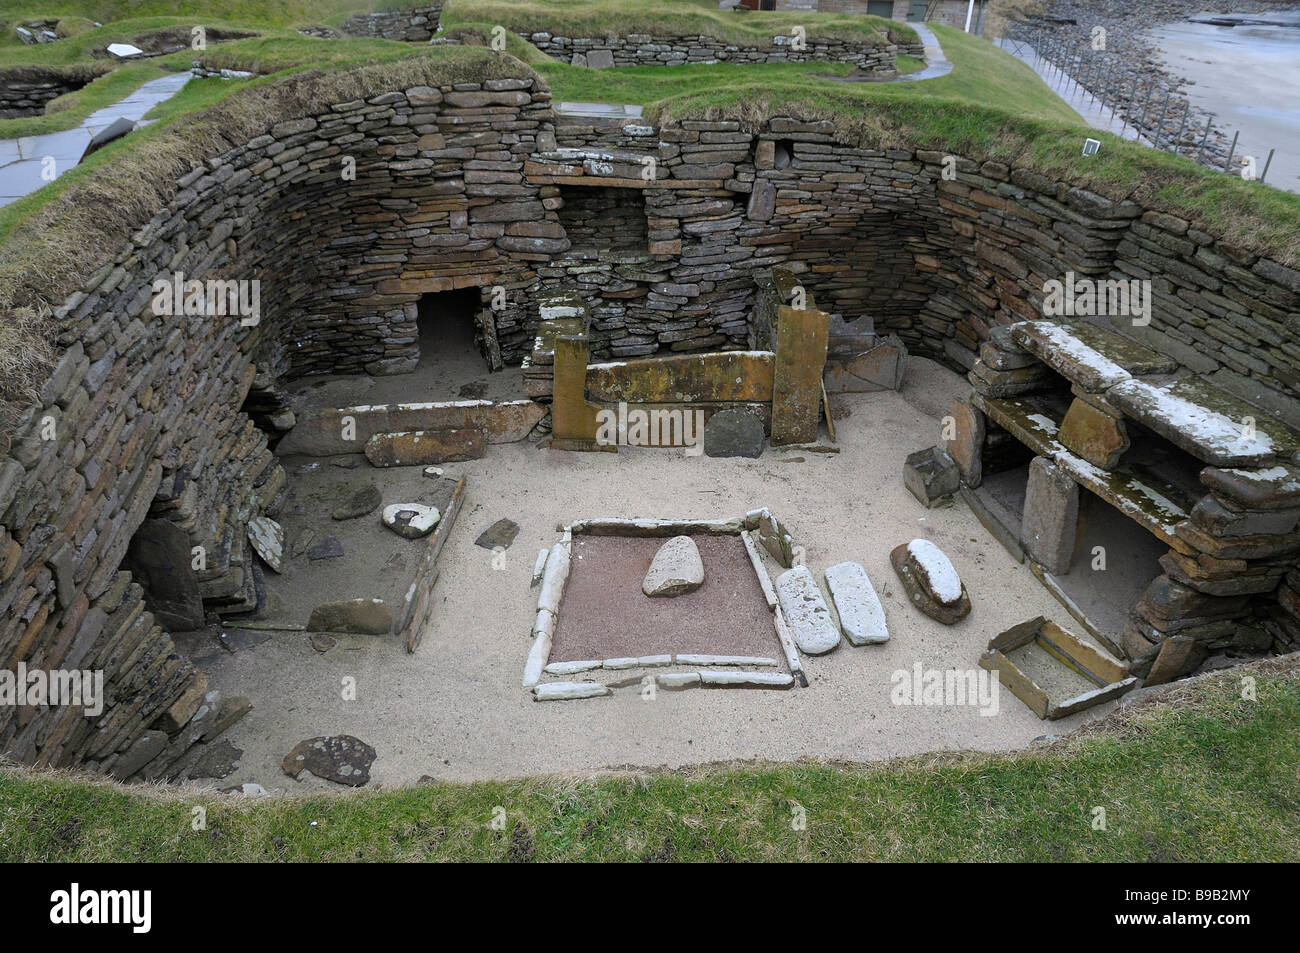 One of the ancient roundhouses excavated at Skara Brae, Orkney, Scotland. Stock Photo